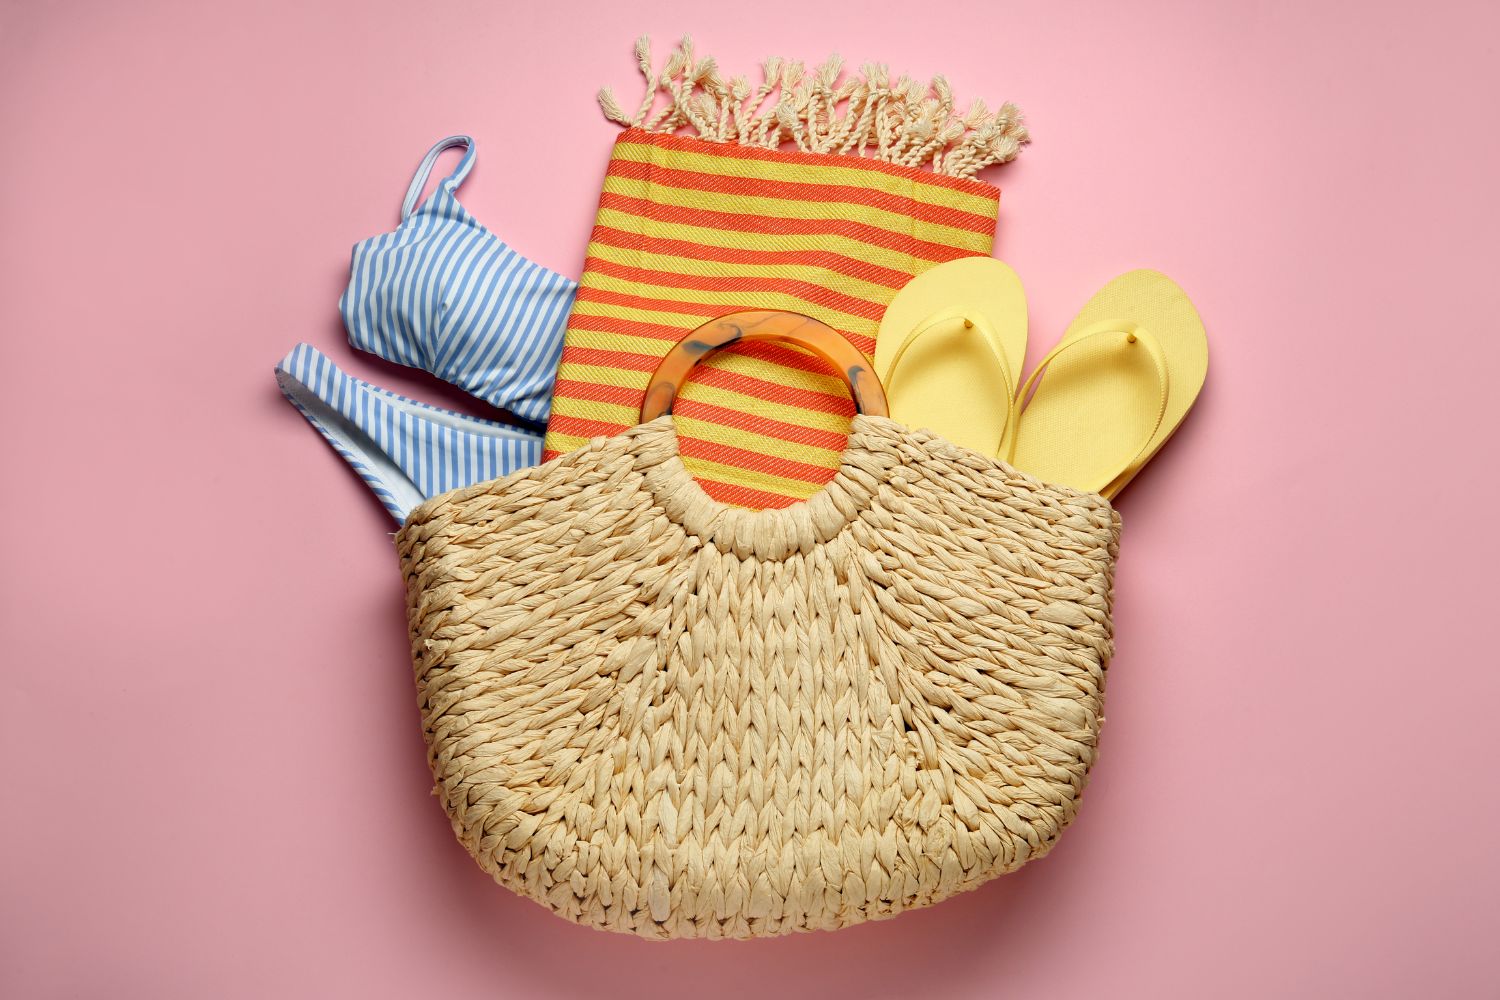 Beach bag with towel, swimsuit and flip flops